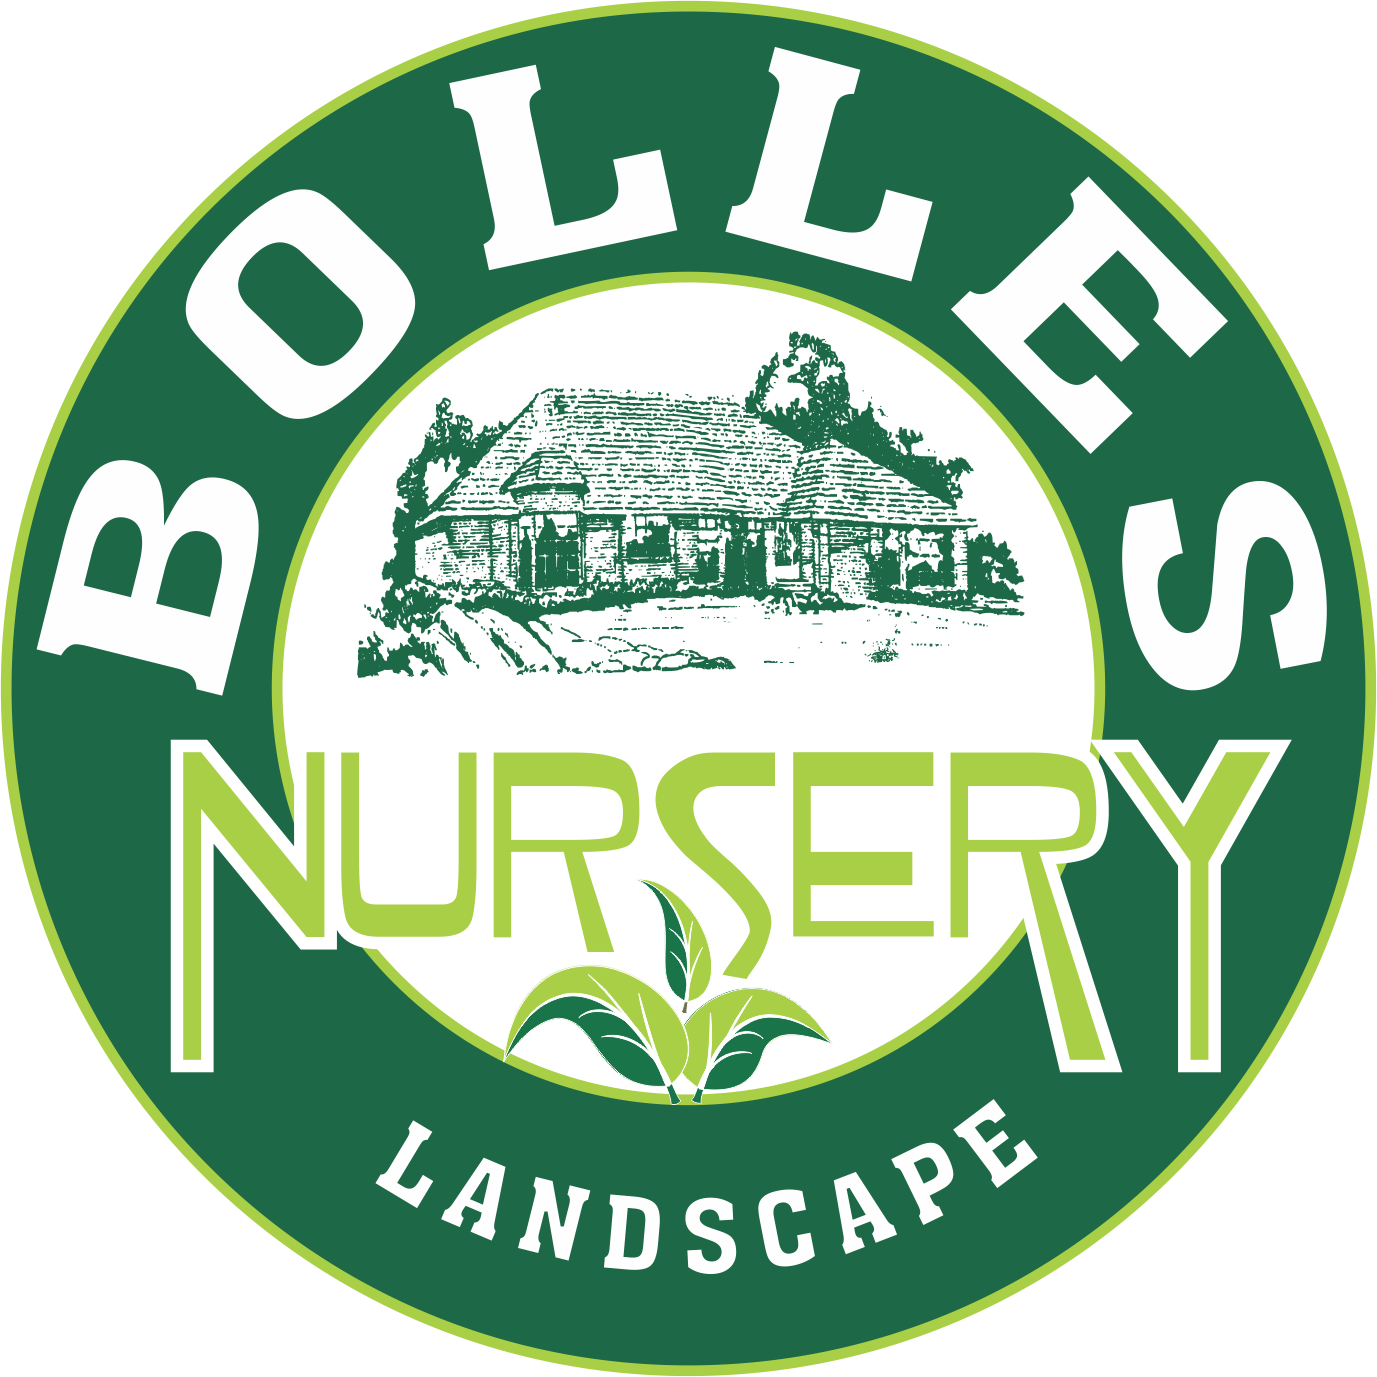 Bolles Nursery’s landscaping services aim to provide inspiration